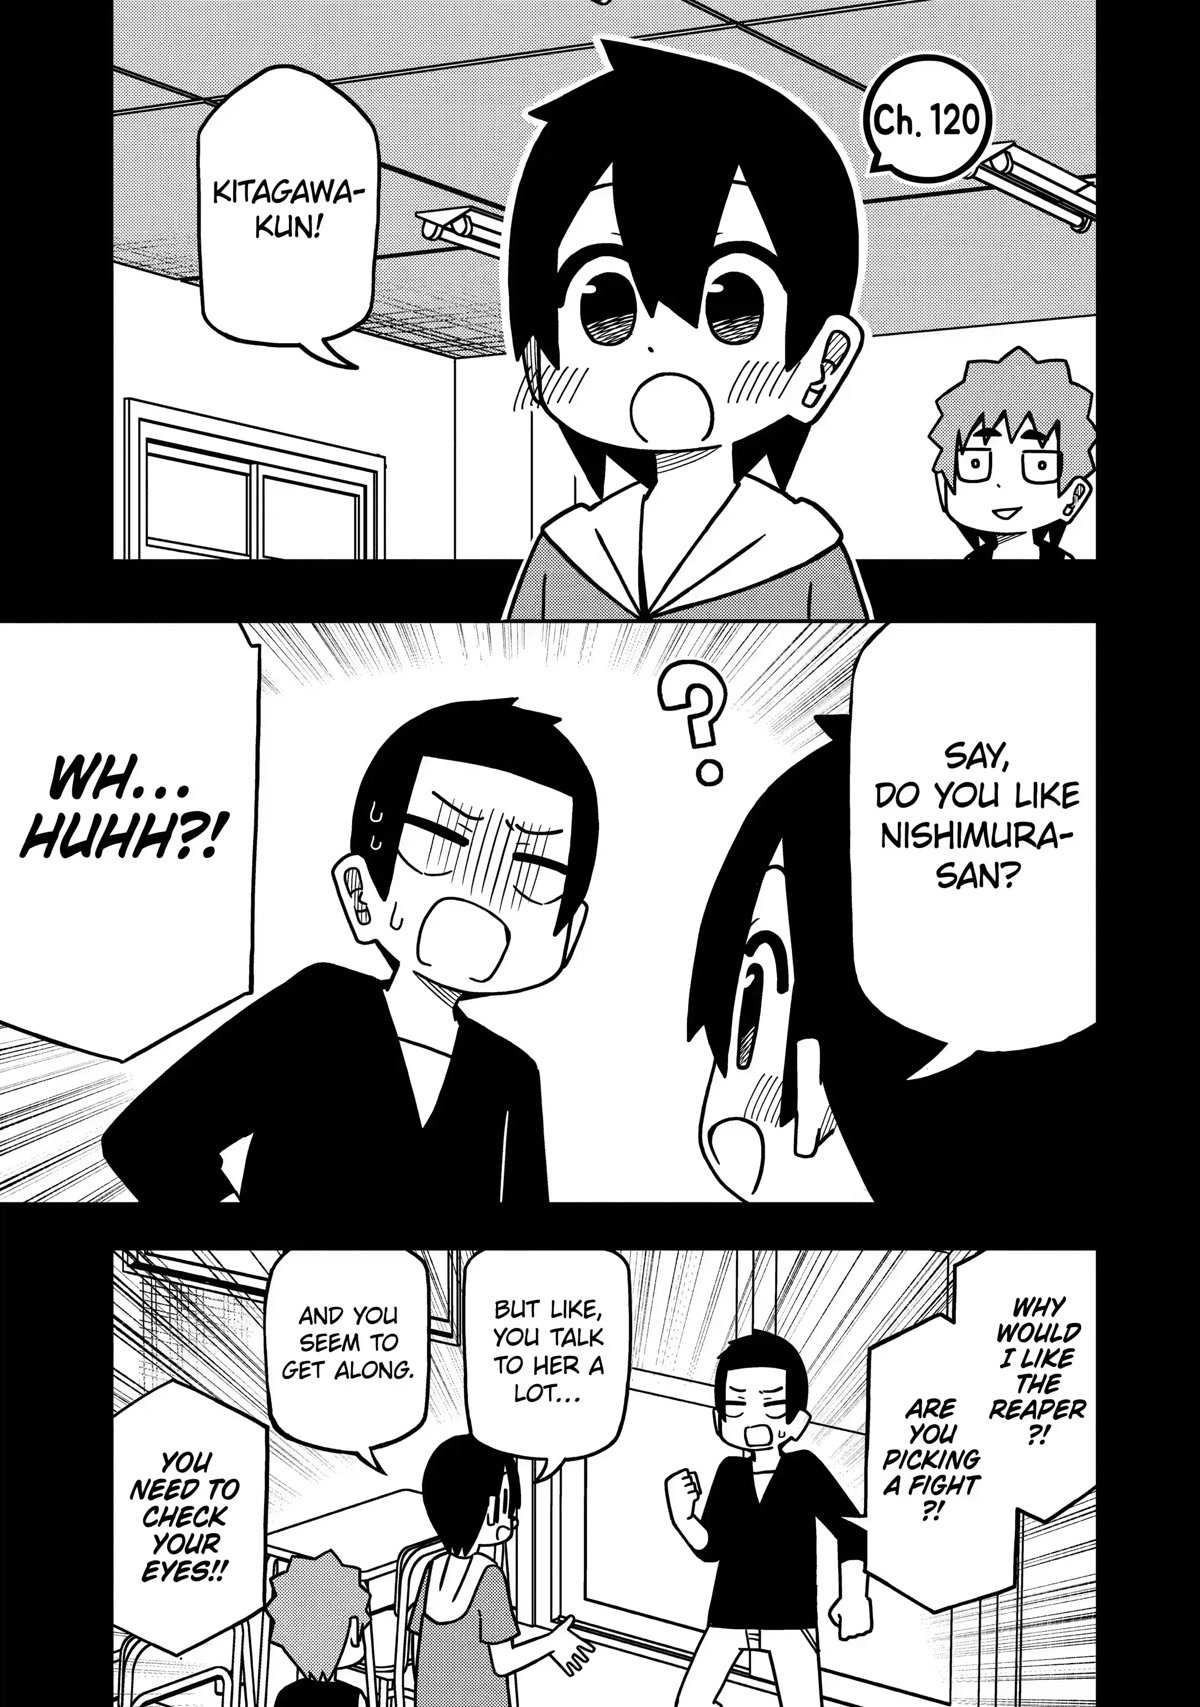 The Clueless Transfer Student Is Assertive. - Page 1